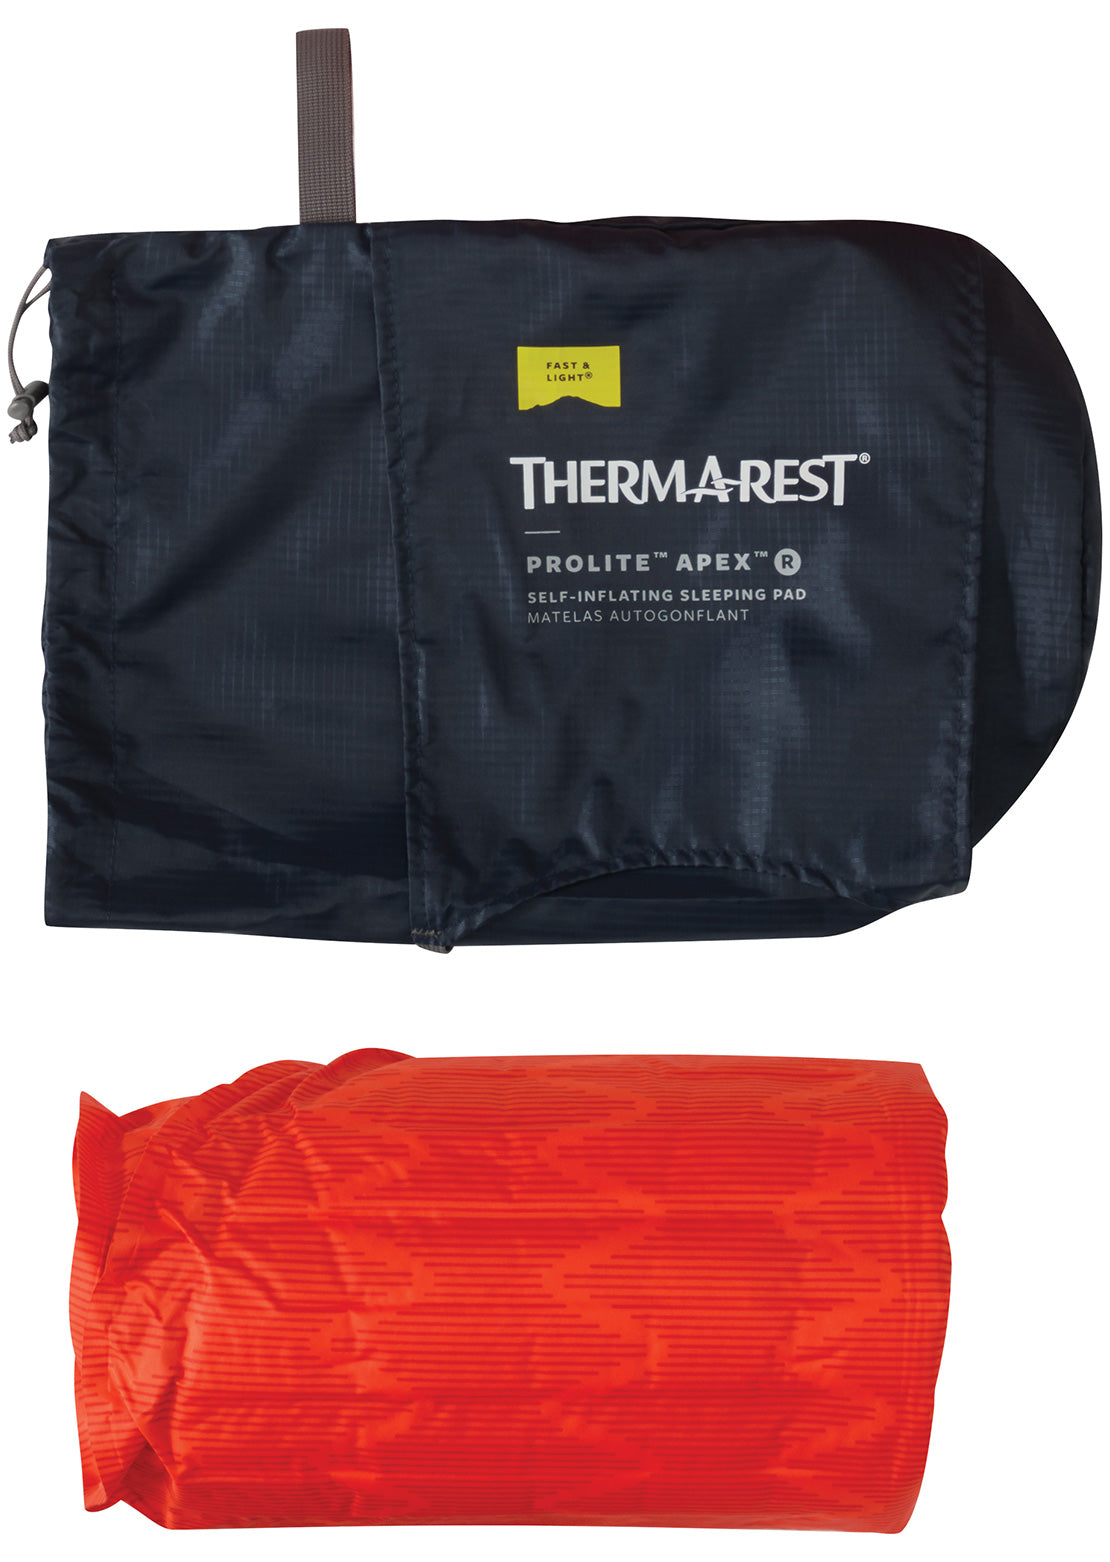 Therm-A-Rest ProLite Apex Large Sleeping Pad Heat Wave